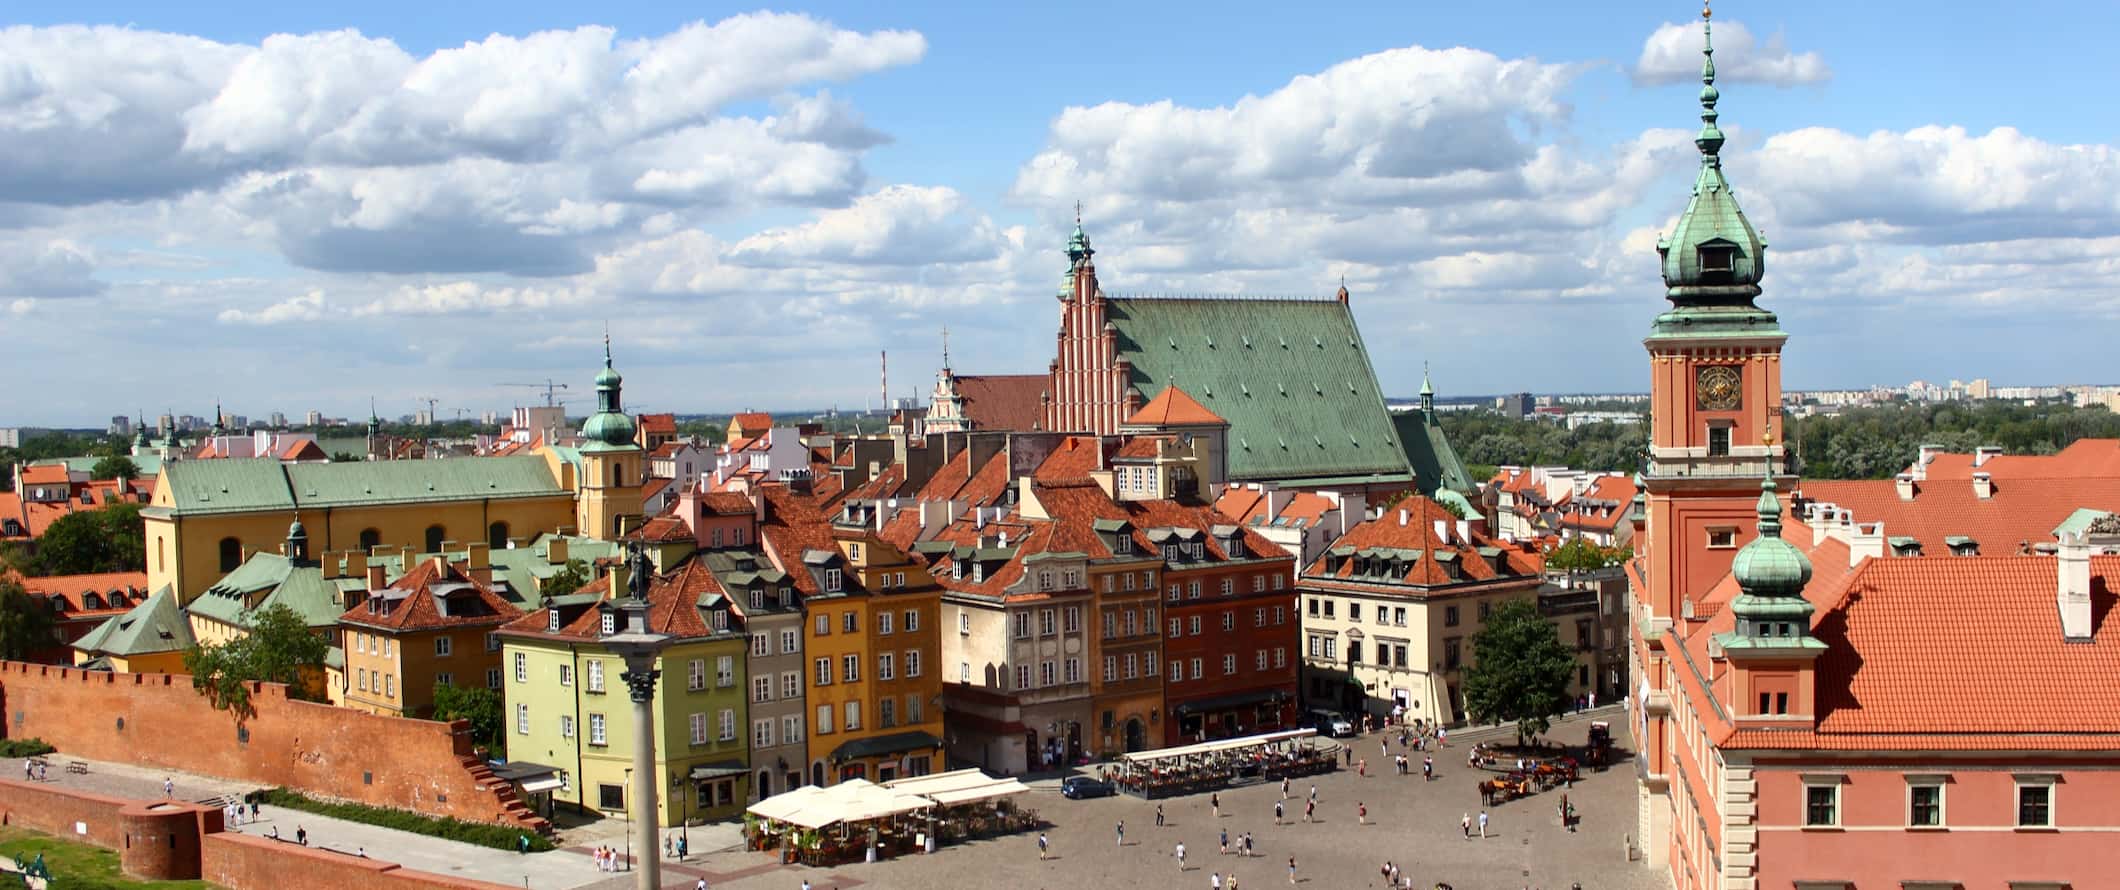 The colorful buildings in the Old Town of Warsaw, Poland as seen from above